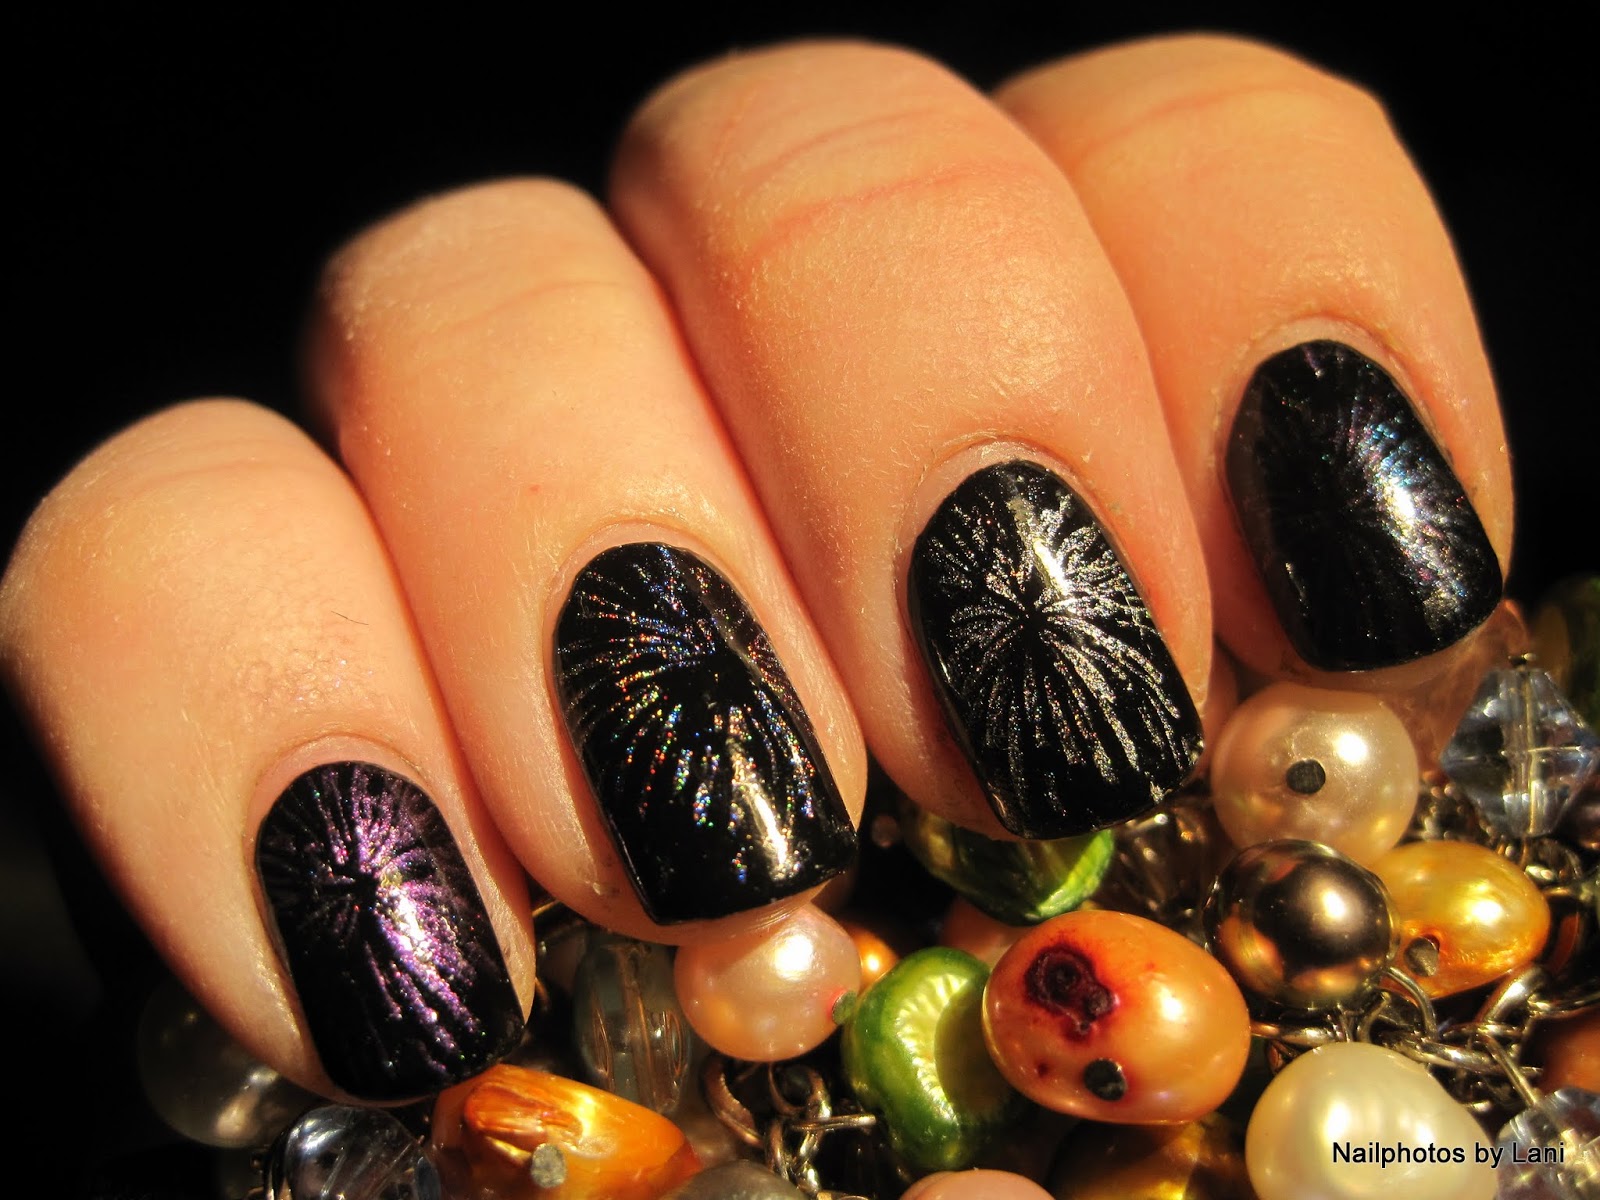 10. Creative New Year's Nail Art Step by Step - wide 10